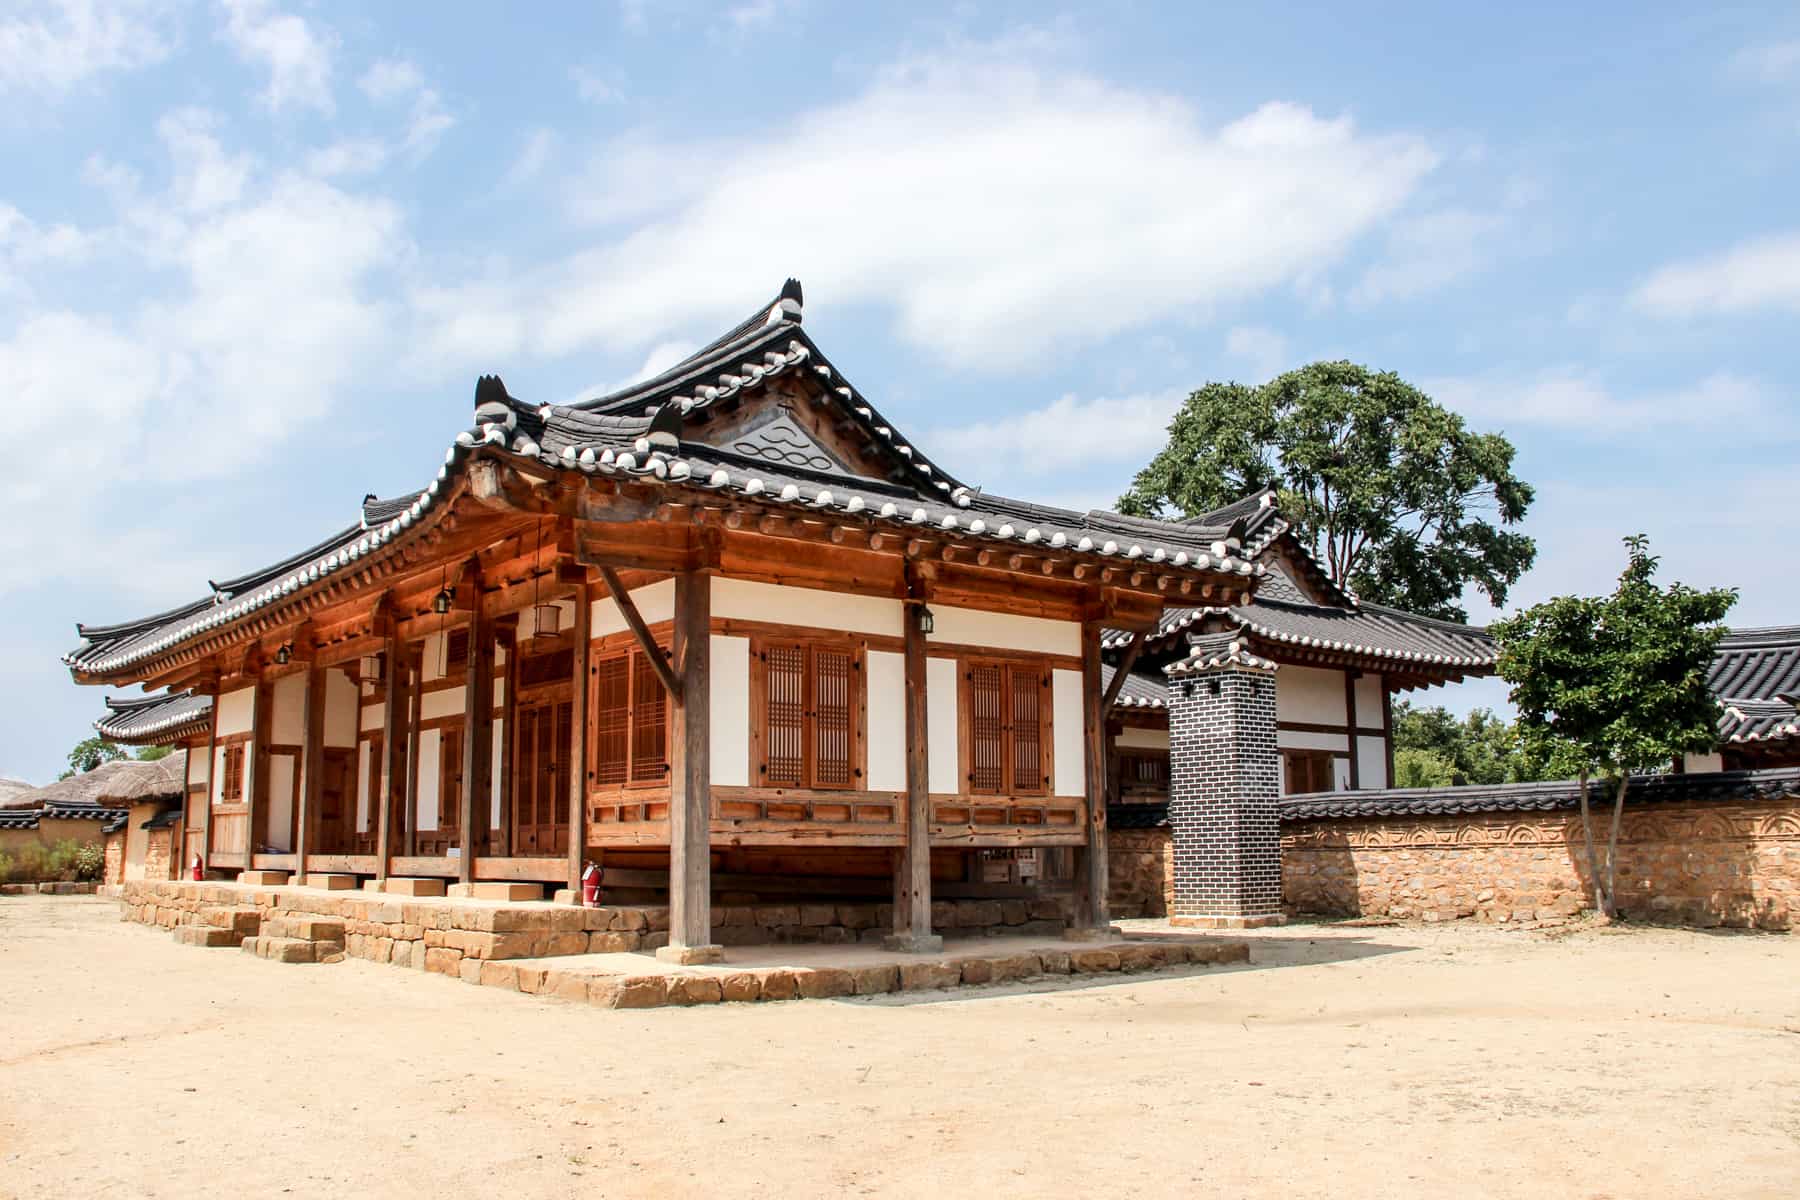 A traditional wooden house in Hahoe Folk Village in Andong - one of Korea's last preserved villages 